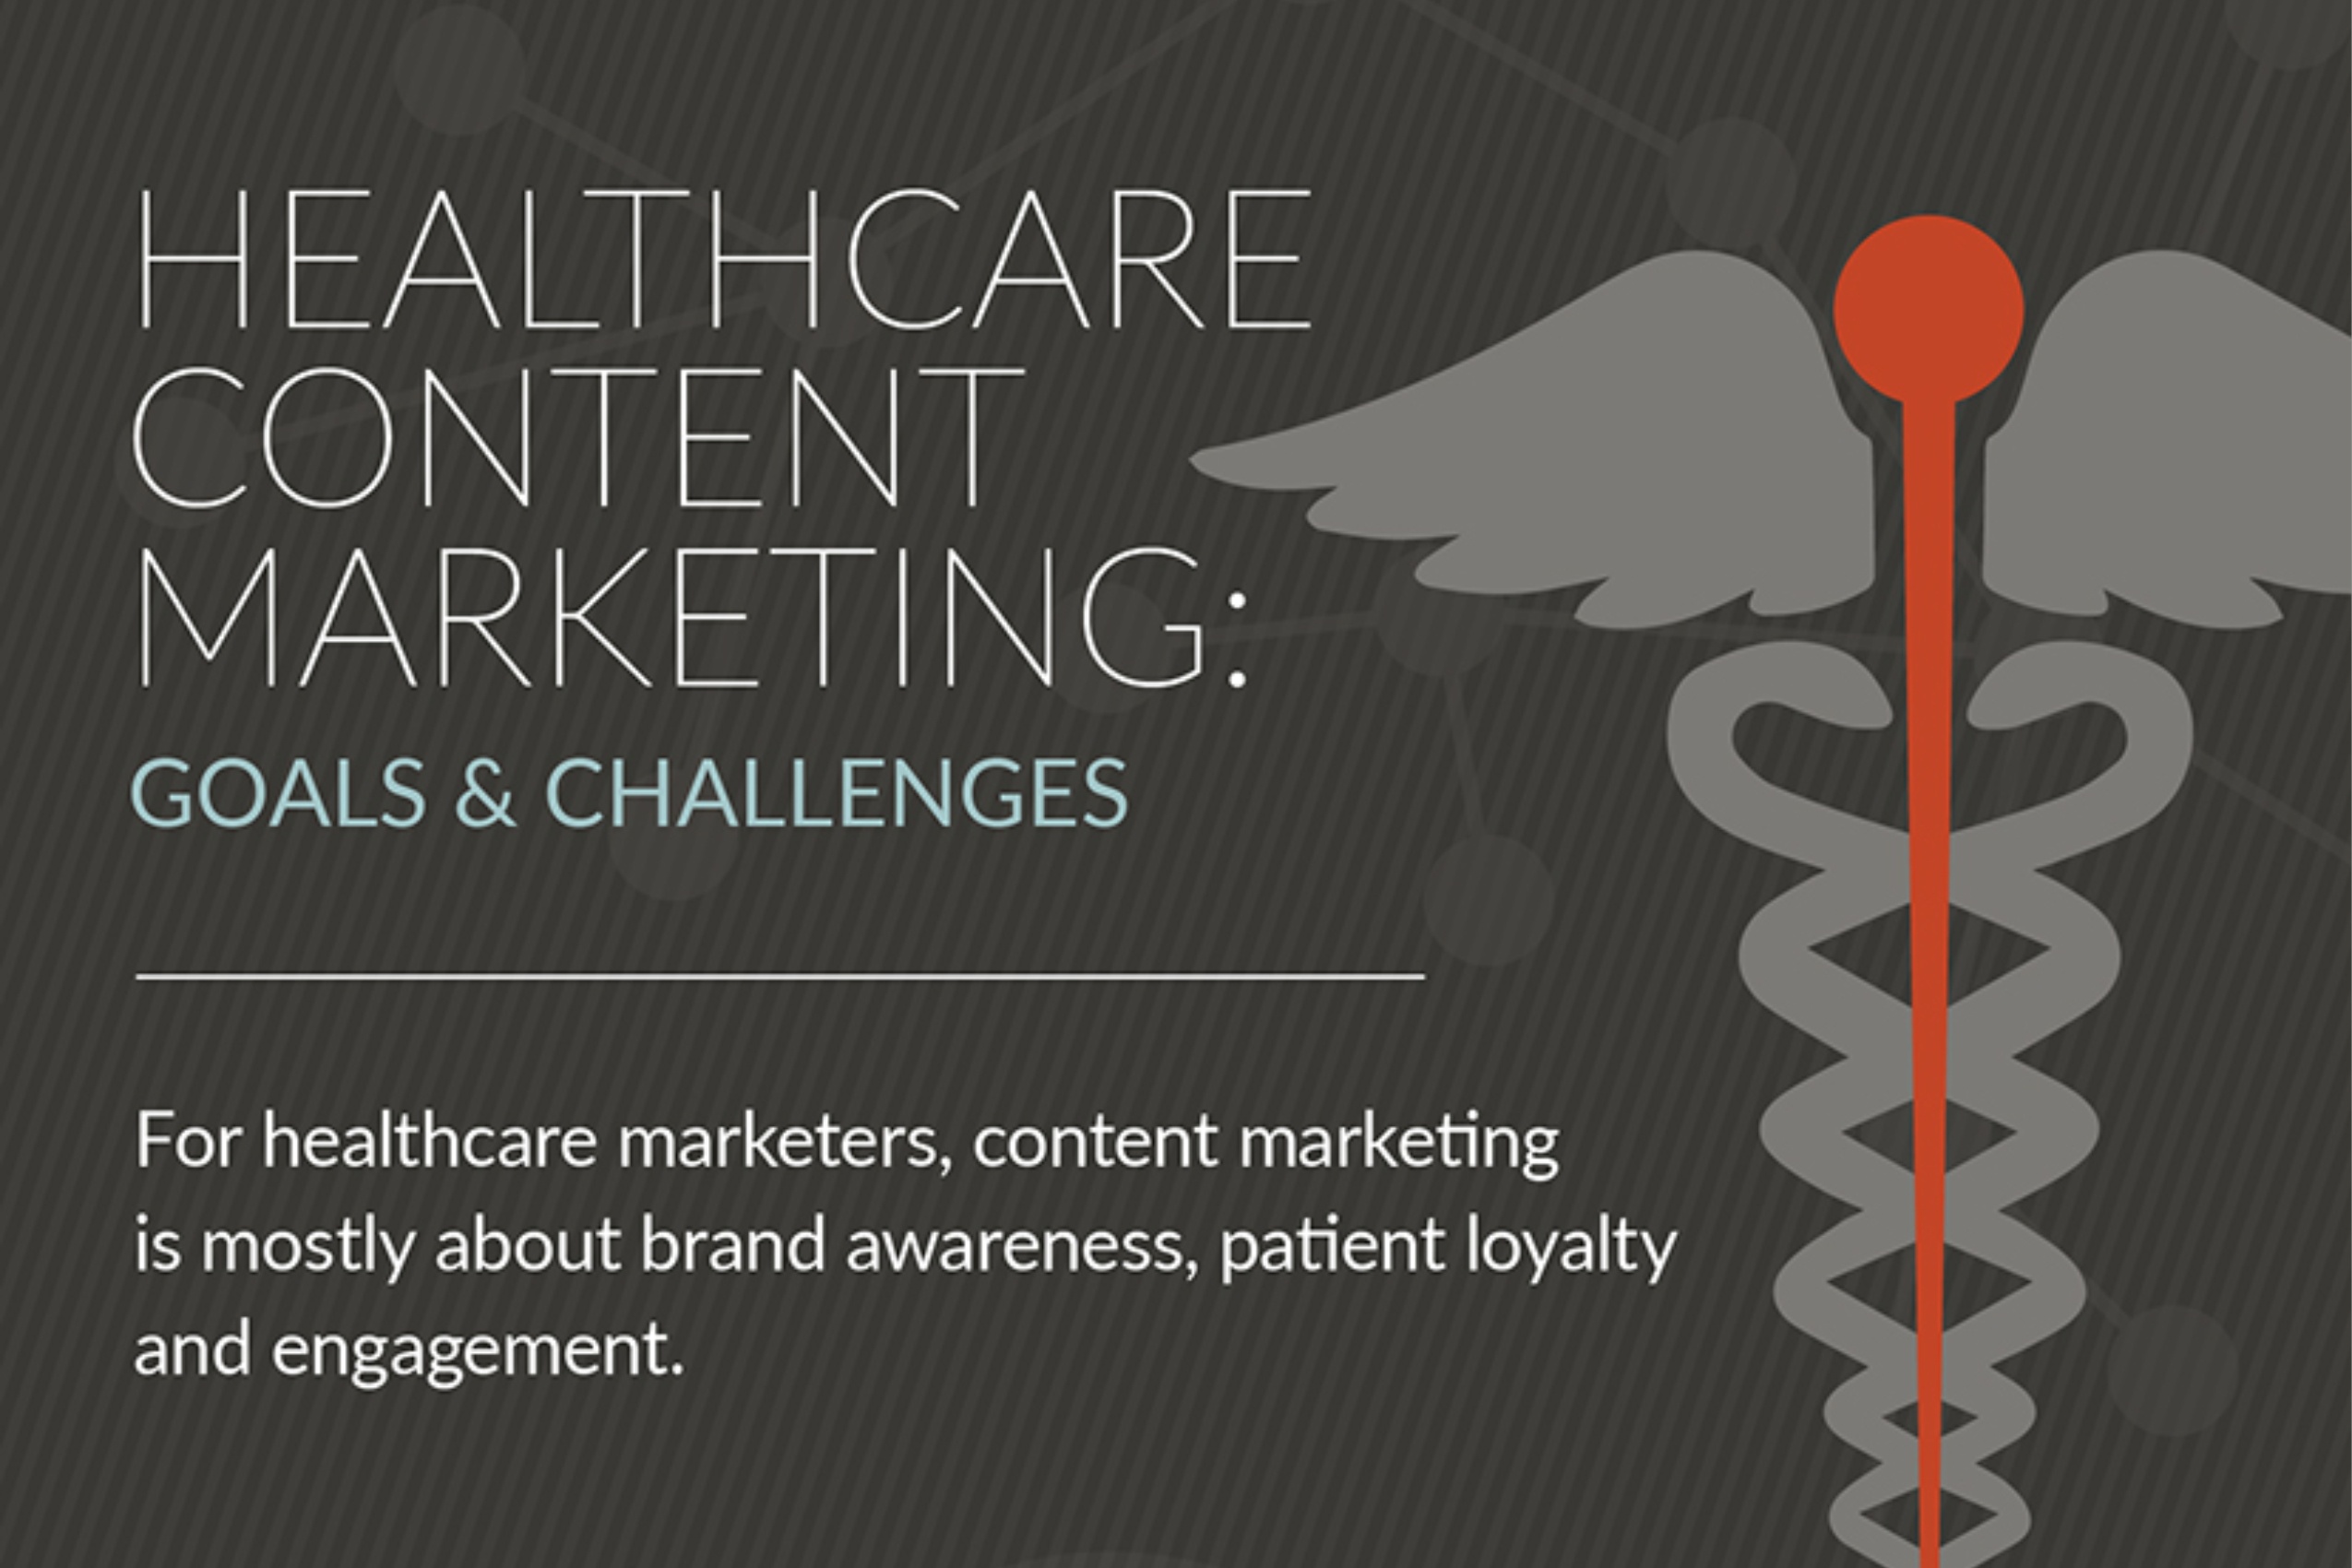 Healthcare Marketers: Content Creation Priorities for 2018